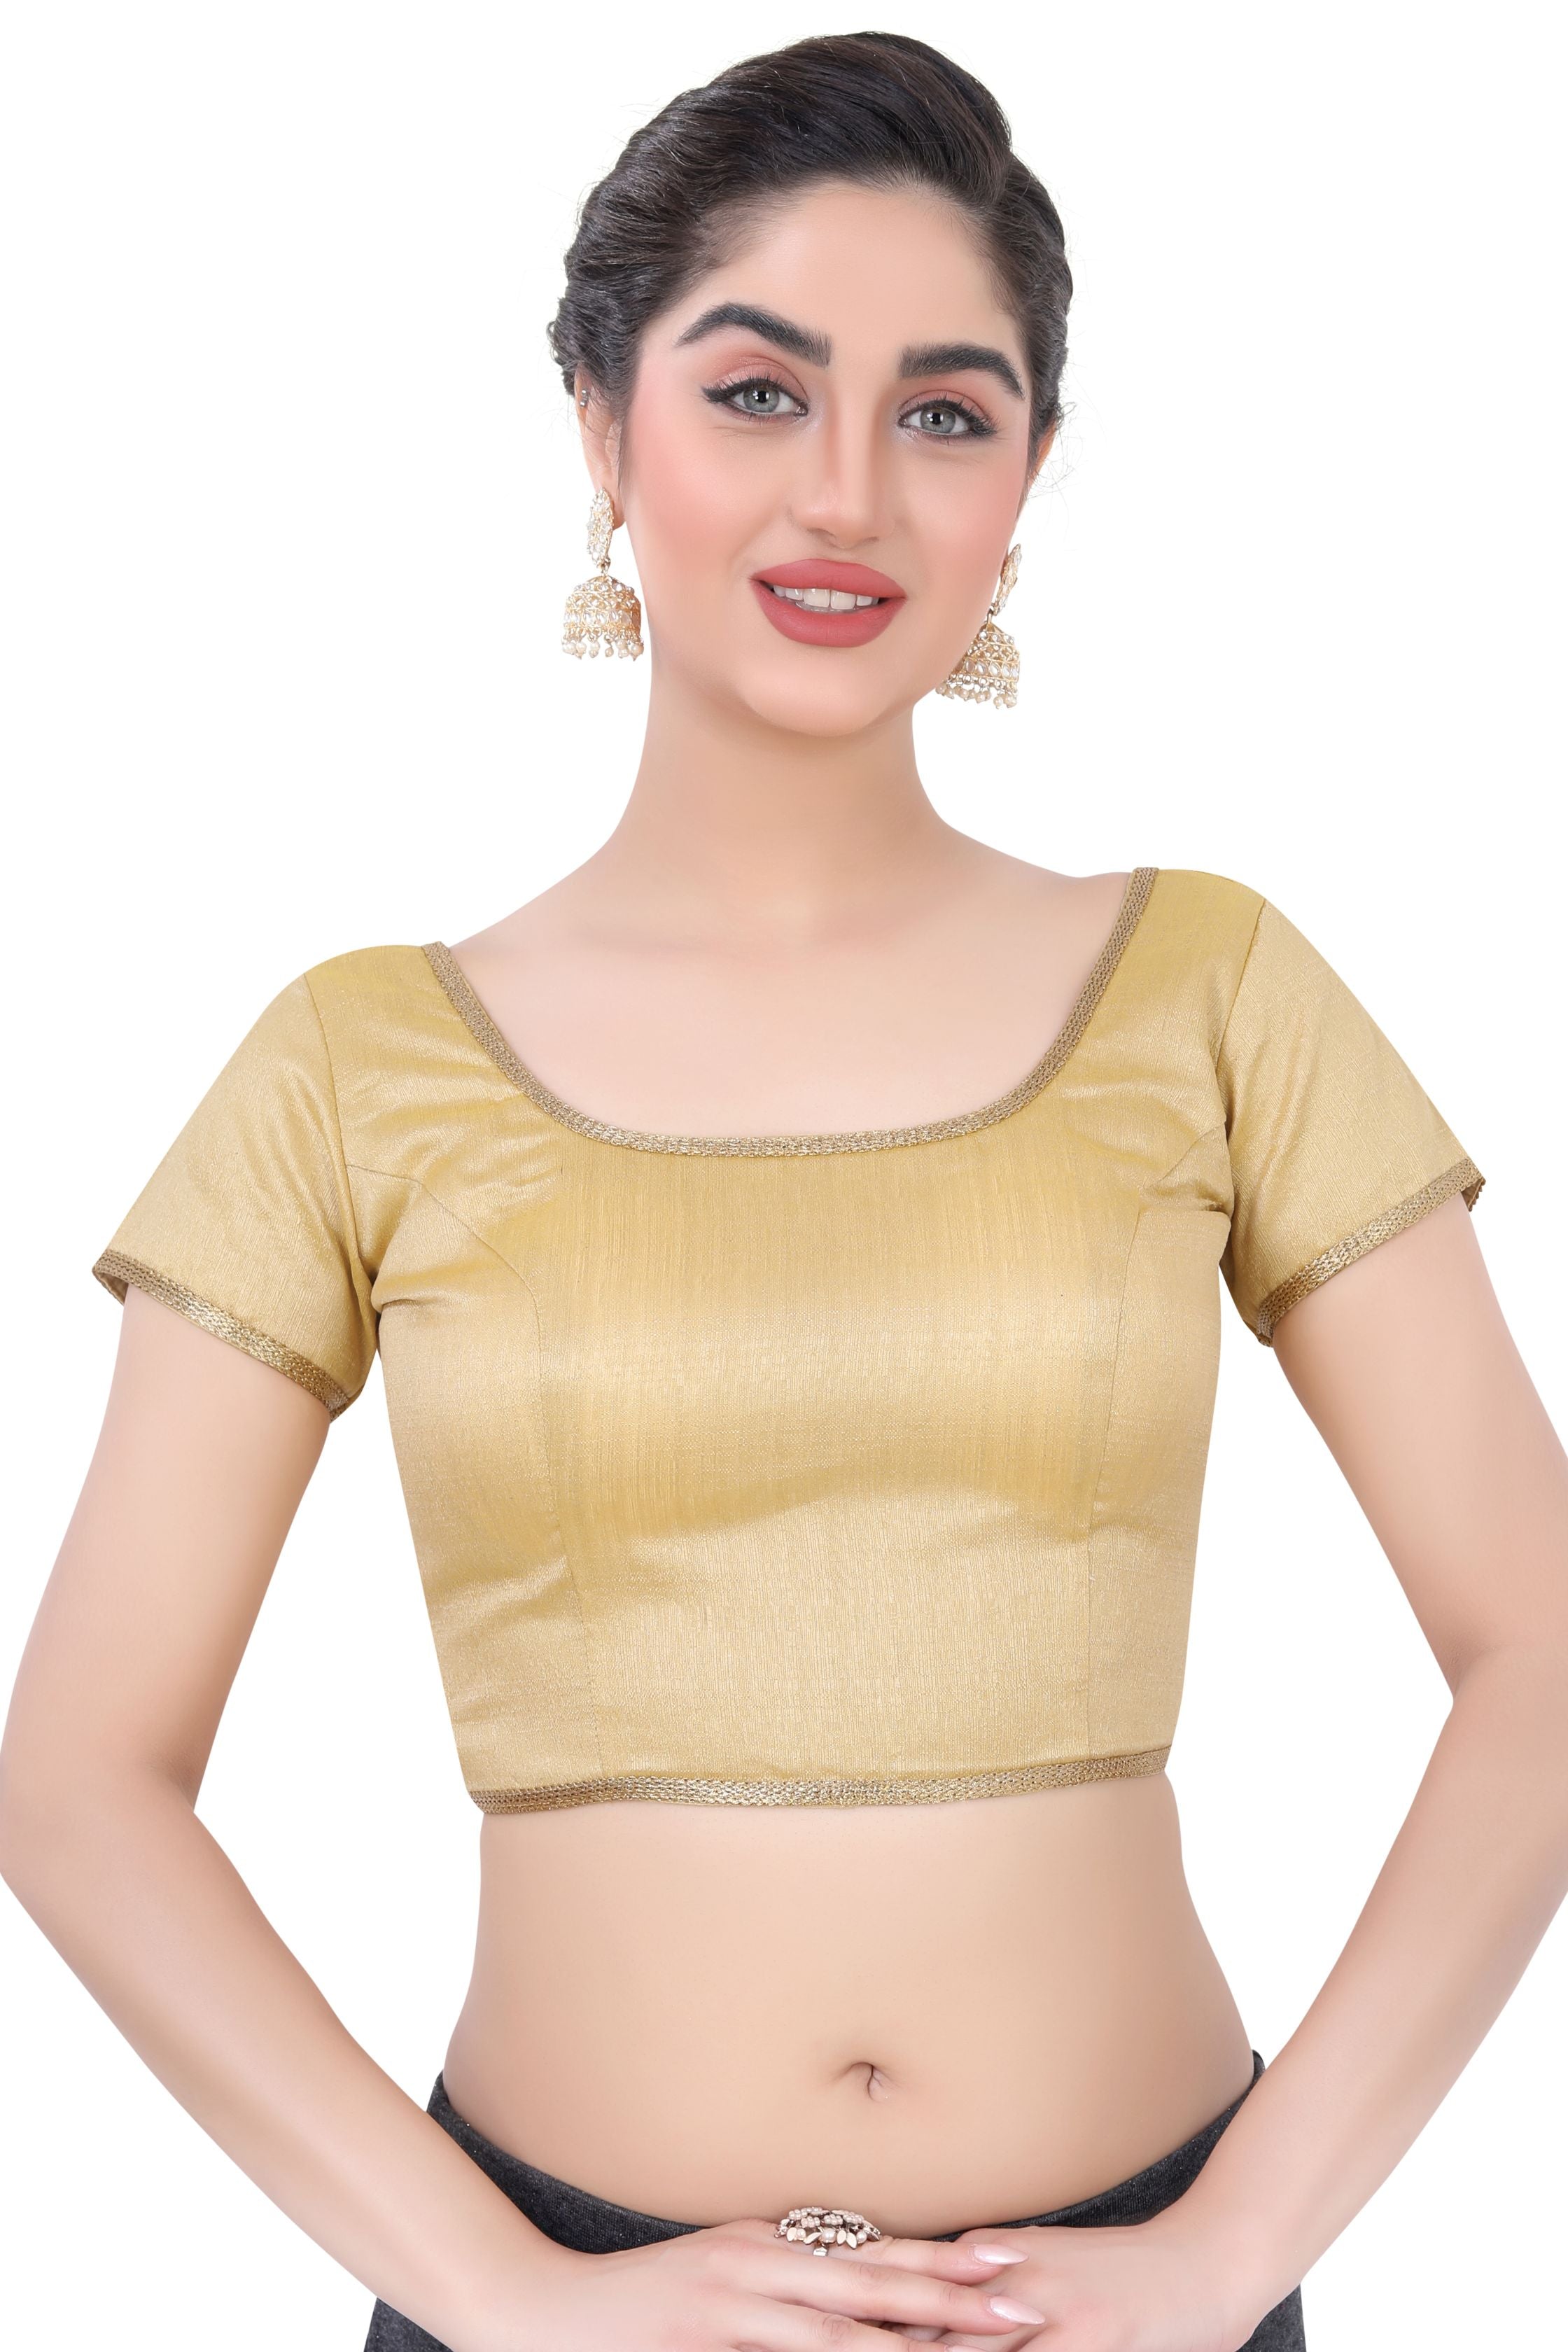 Short Sleeve Women's Bangalori satin/Brocade Blouses for partywear sarees in Gold BSB/11